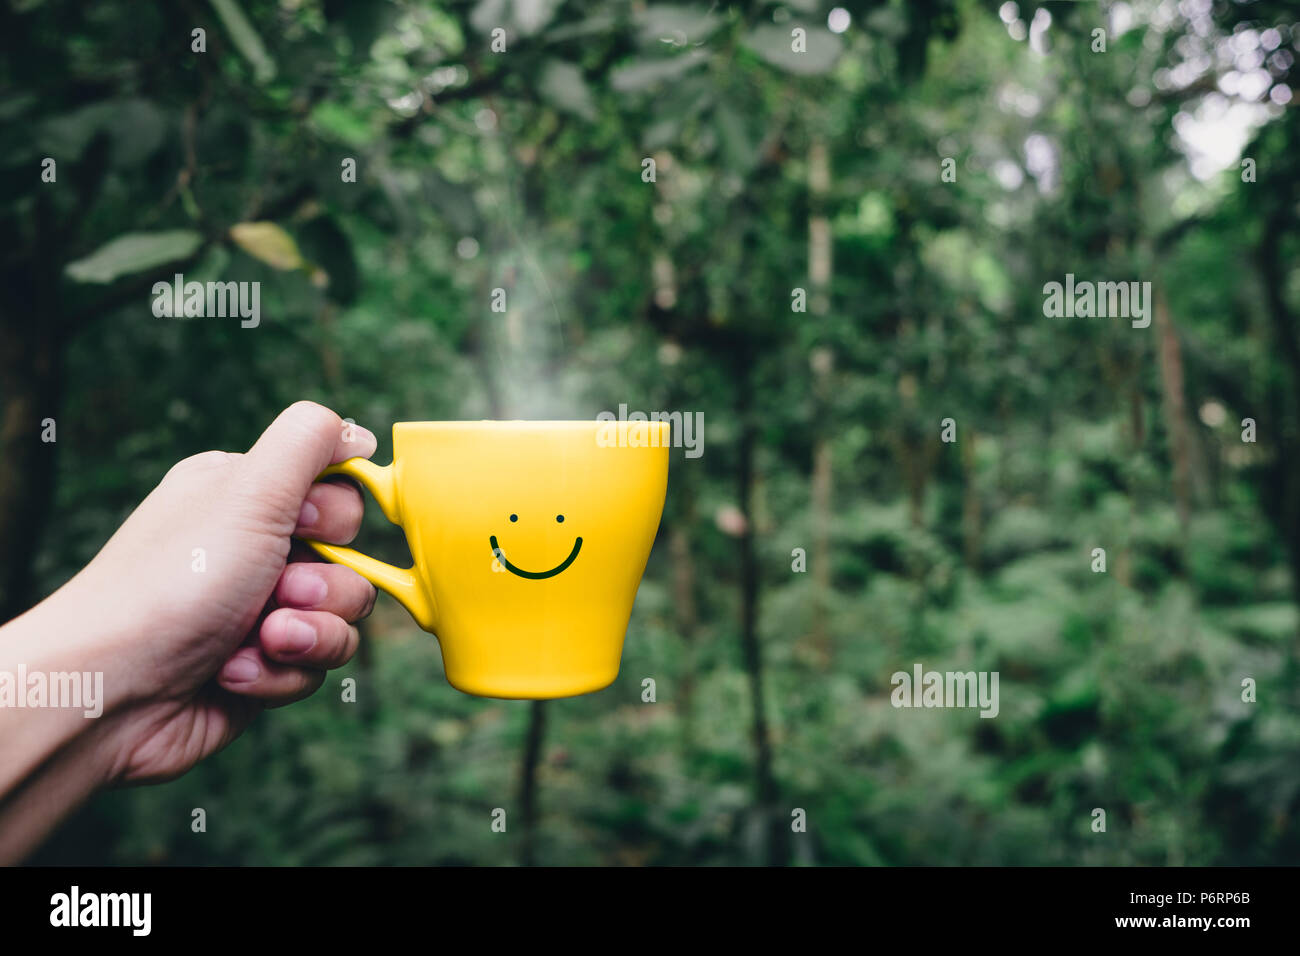 Download Hand Holding Hot Yellow Coffee Cup With Hand Drawn Smile Face On Cup At Tropical Nature Forest Leisure Lifestyle Stock Photo Alamy Yellowimages Mockups